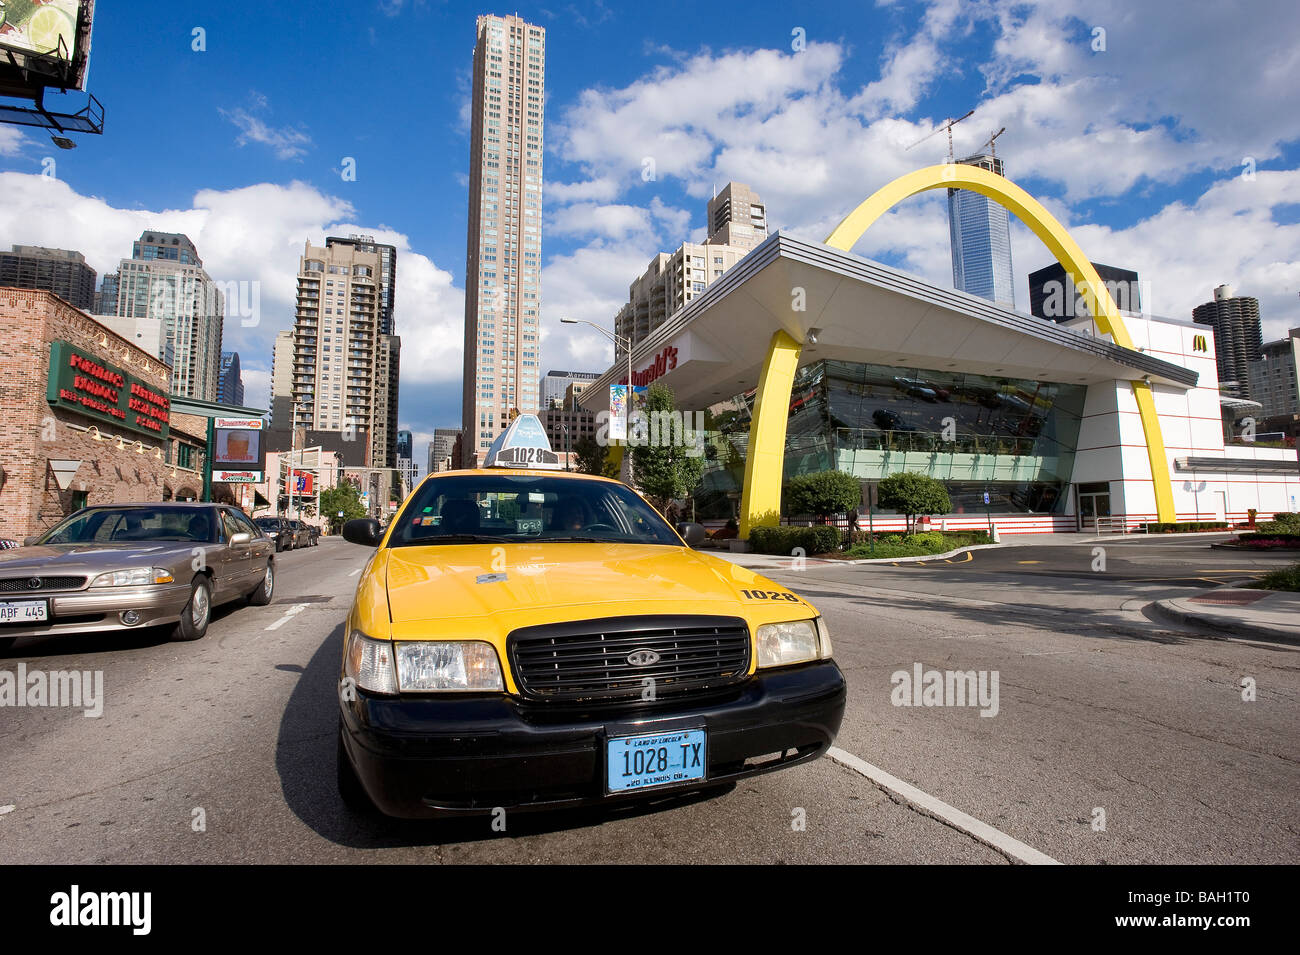 United States, Illinois, Chicago, McDonald's is born in Des Plaines in the suburbs of Chicago, this one opened in 2005 for it's Stock Photo